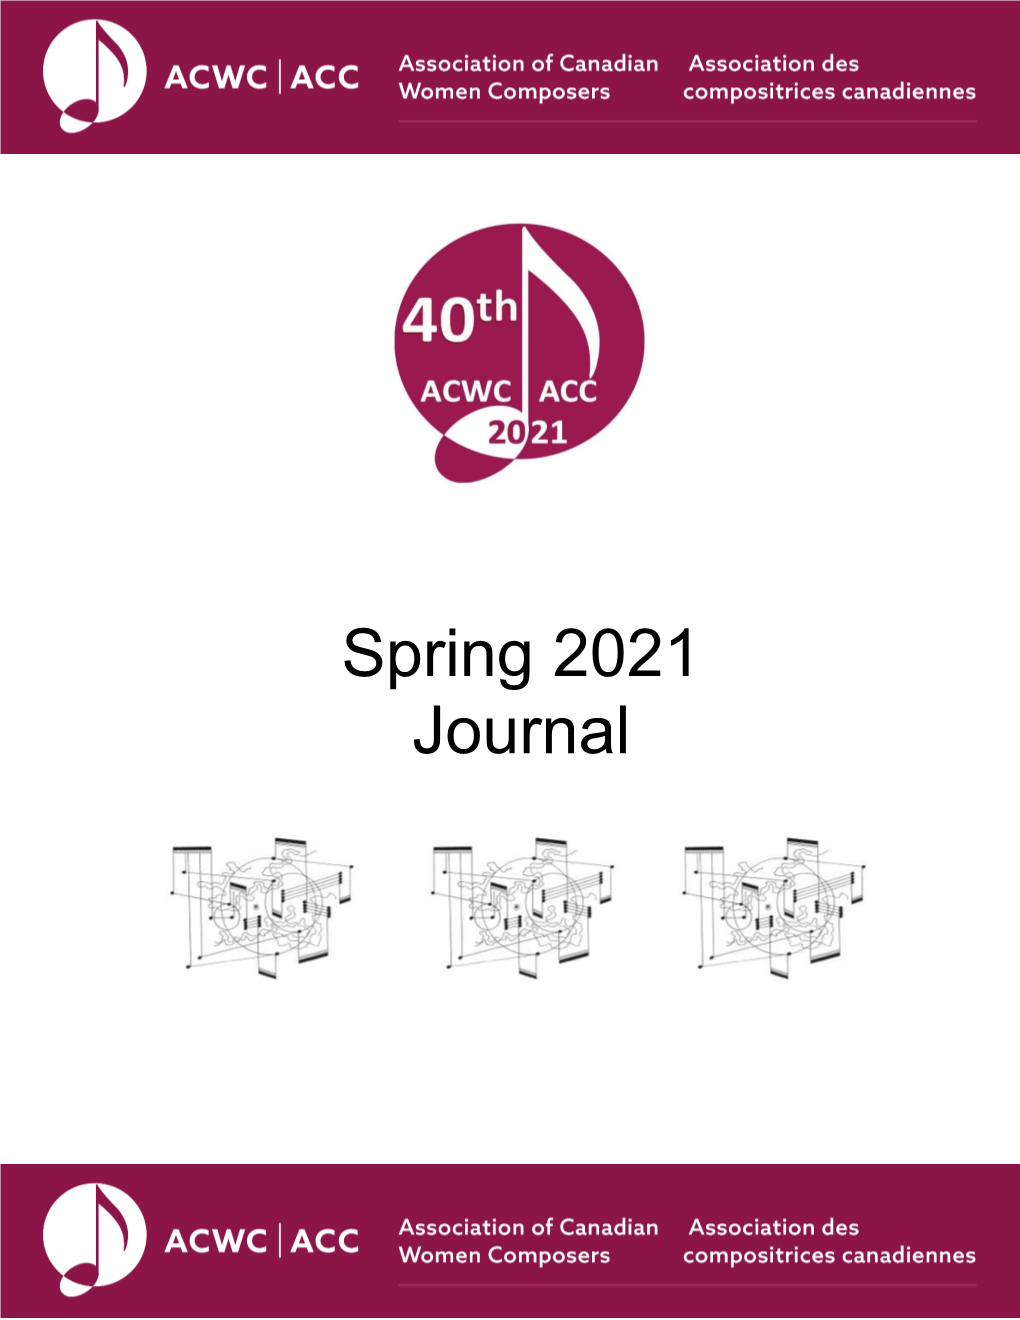 ACWC Spring 2021 Journal Is Here!